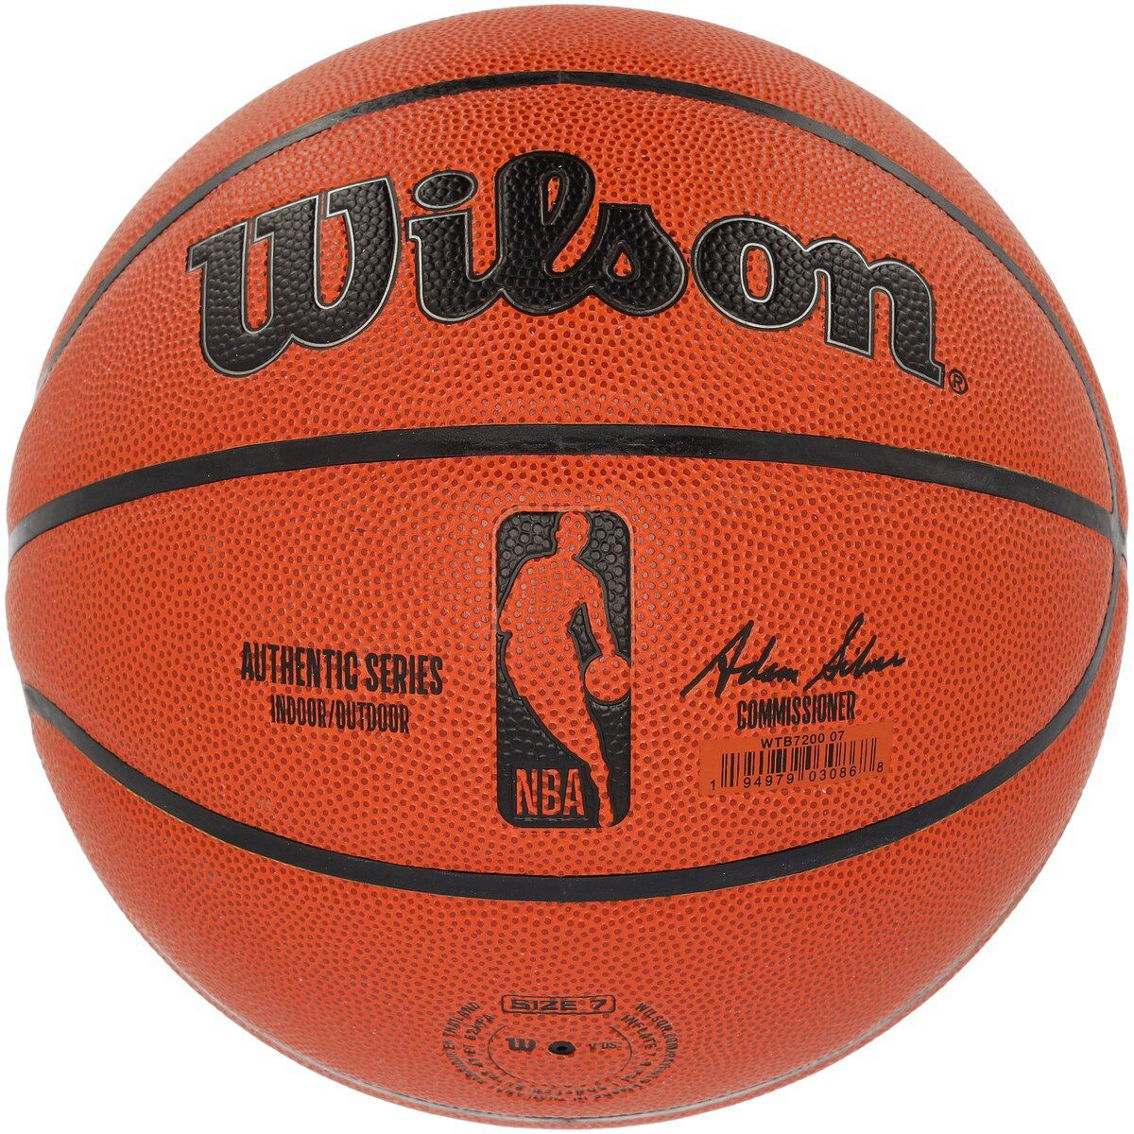 Fanatics Authentic Kevin McHale Boston Celtics Autographed Wilson Authentic Series Indoor/Outdoor Basketball - Image 3 of 3